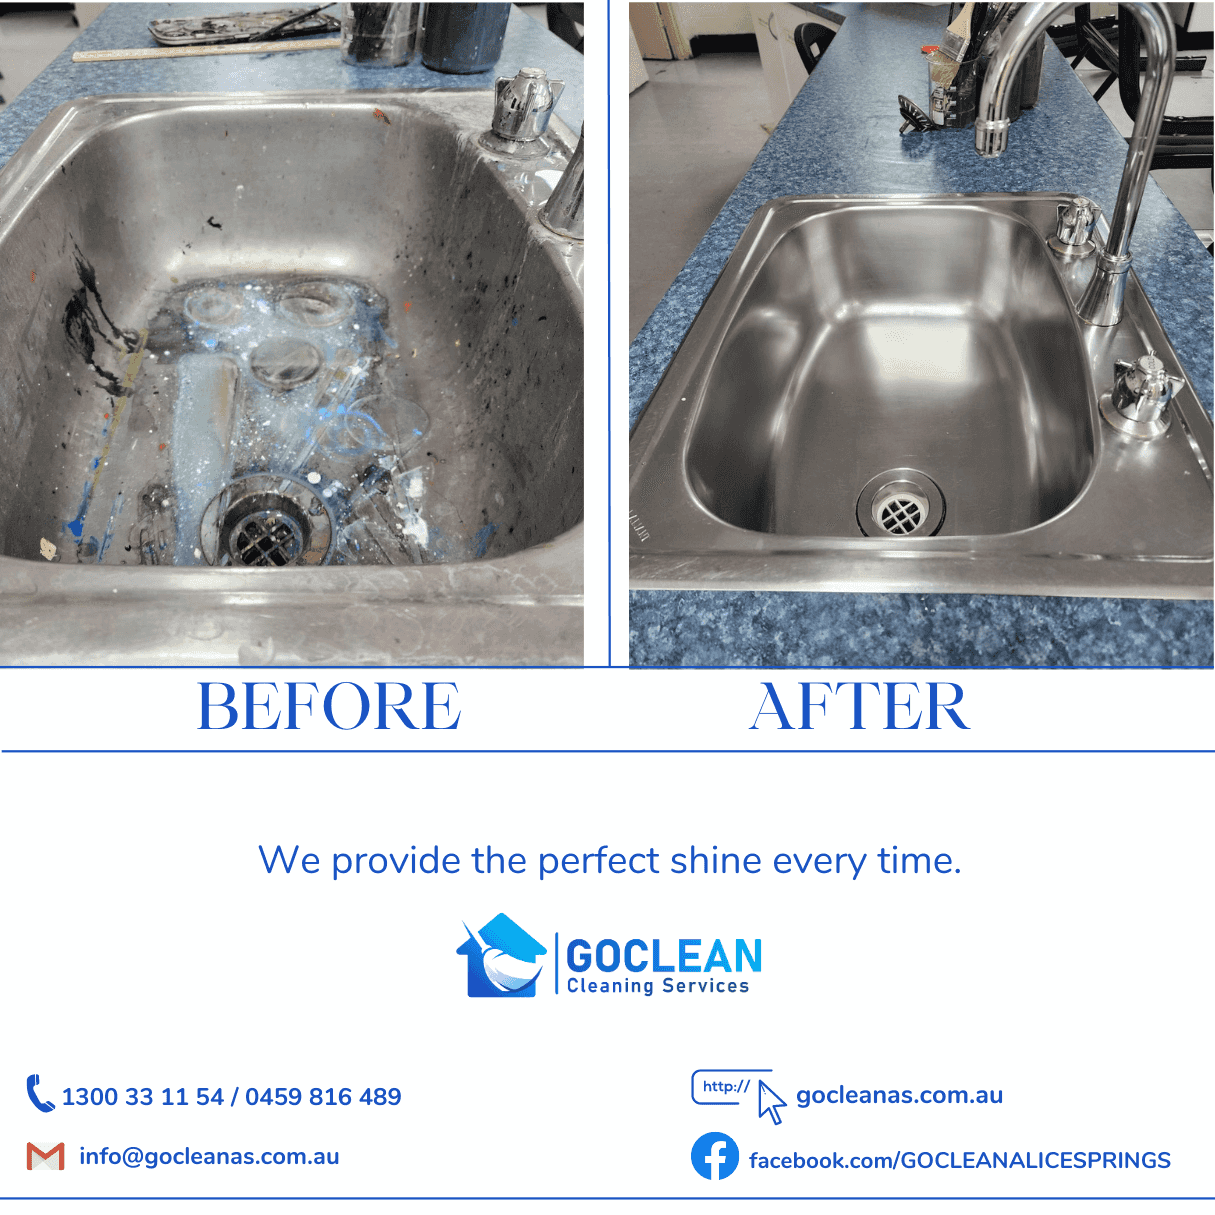 Goclean Cleaning Services image